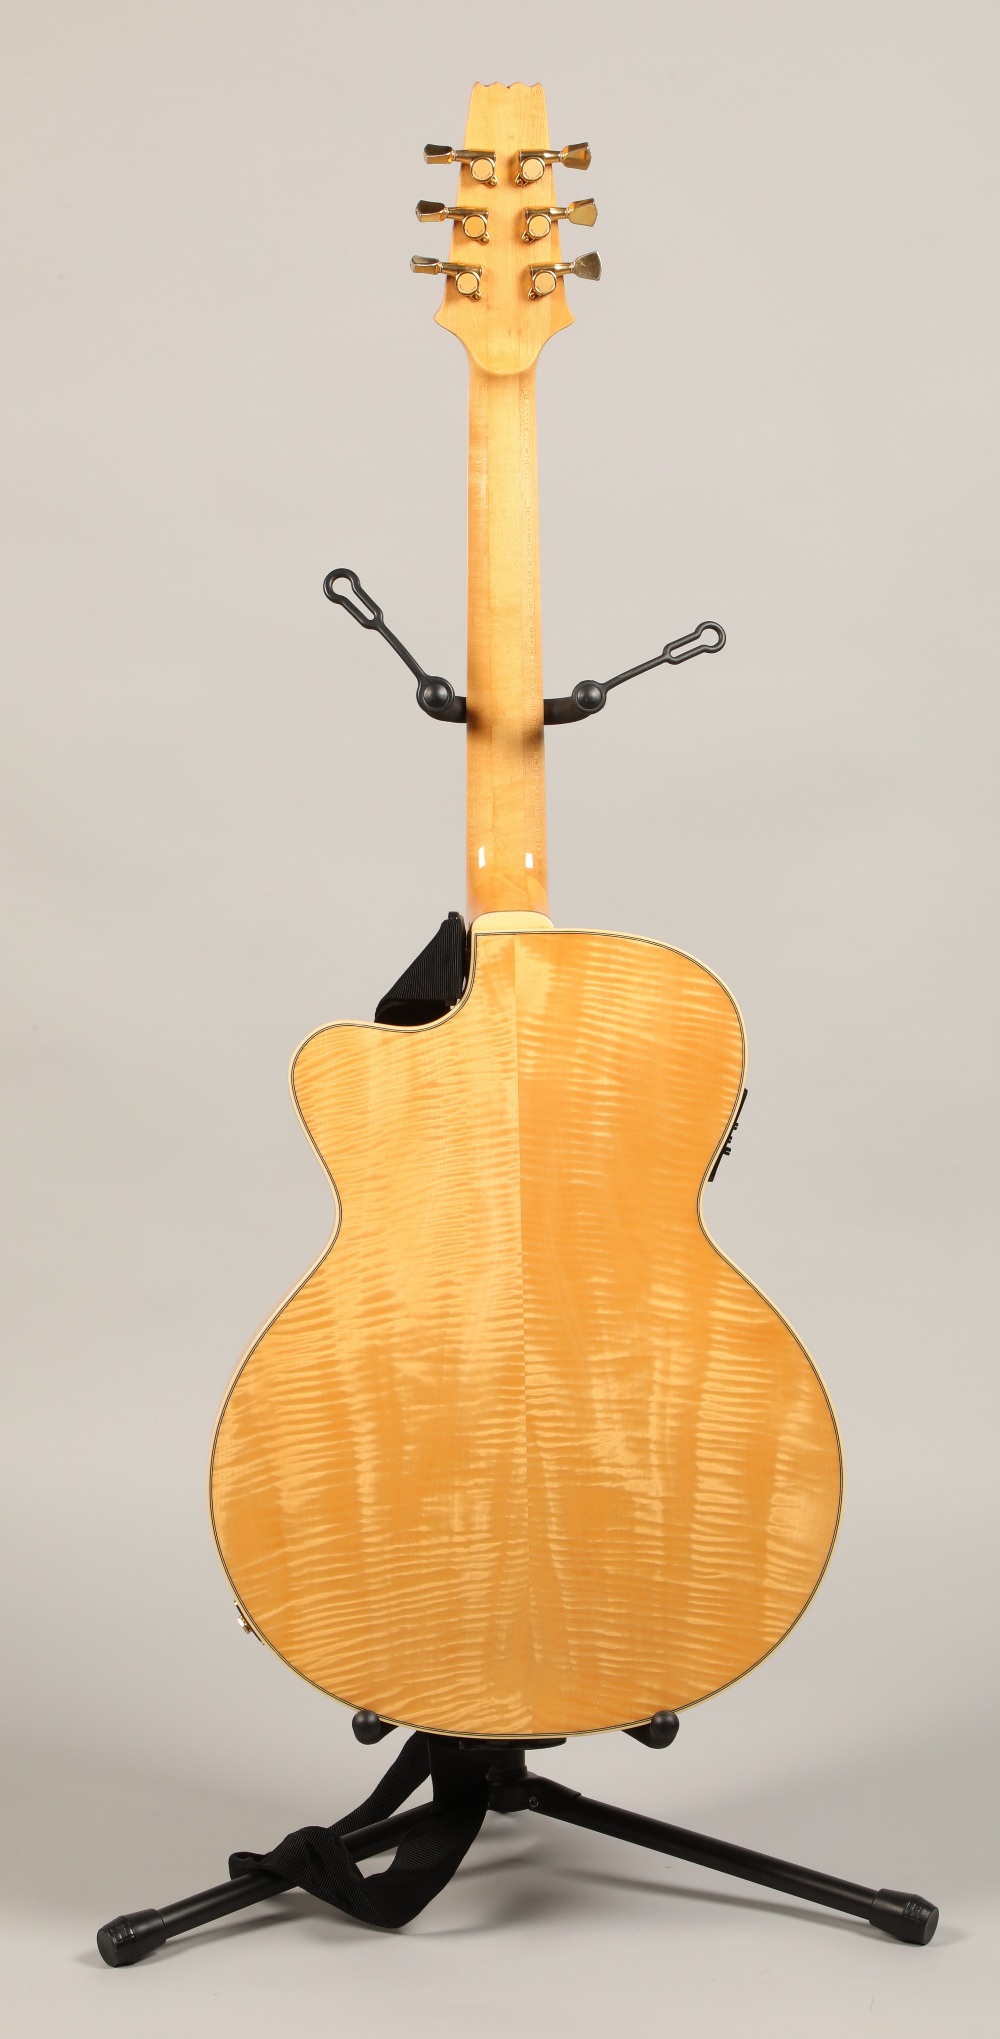 Aria Elecord blonde Fet 100 acoustic electric guitar, serial number 890144 in hard case - Image 2 of 2